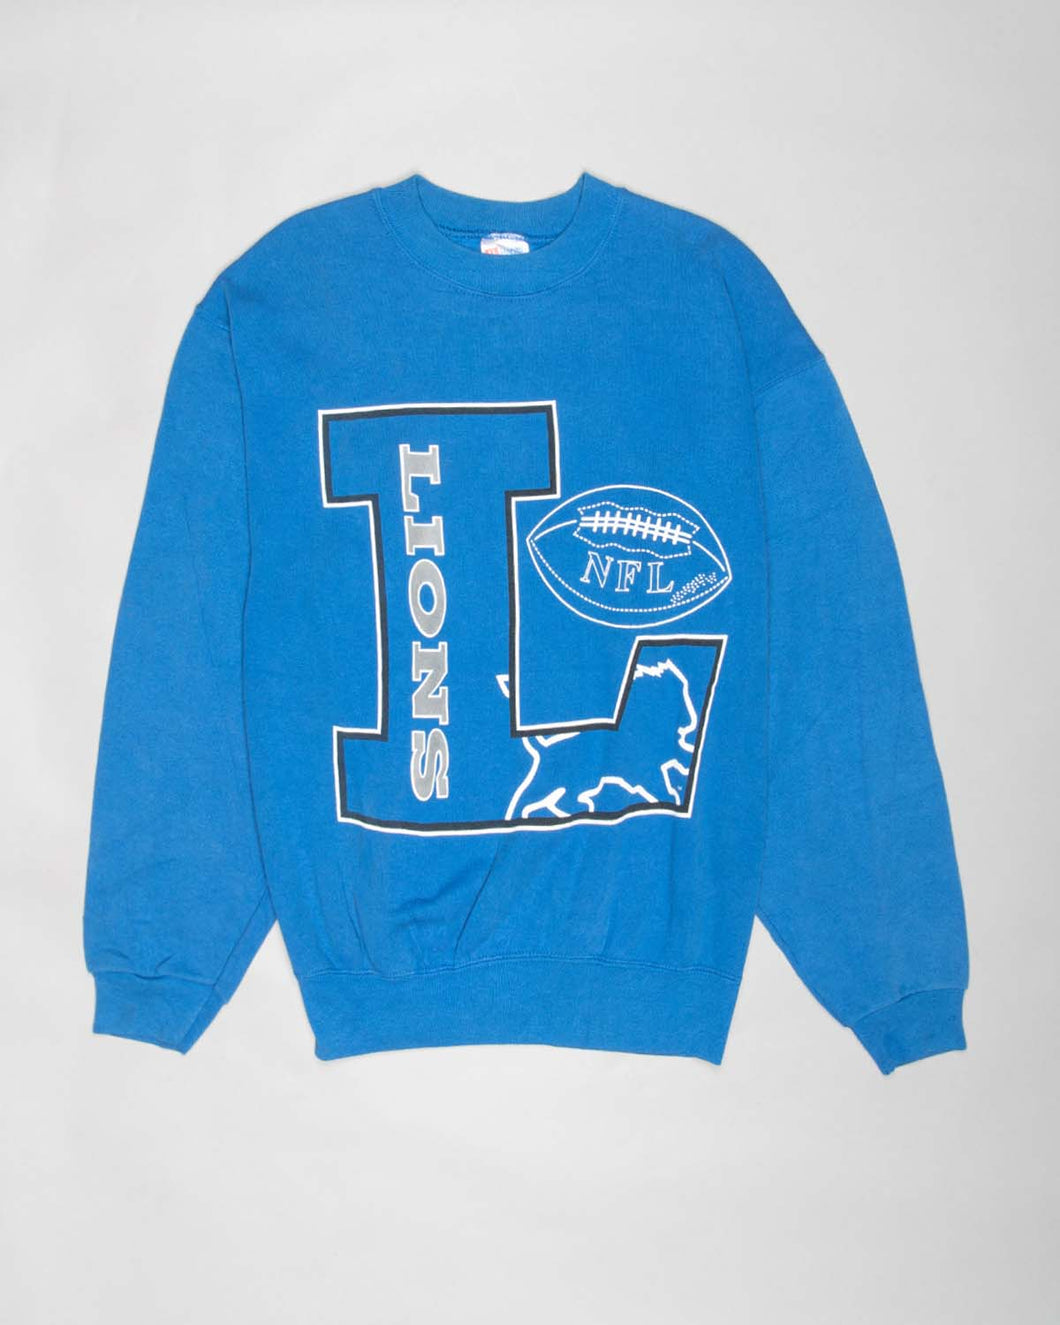 NFL lions royal blue round necked sweater